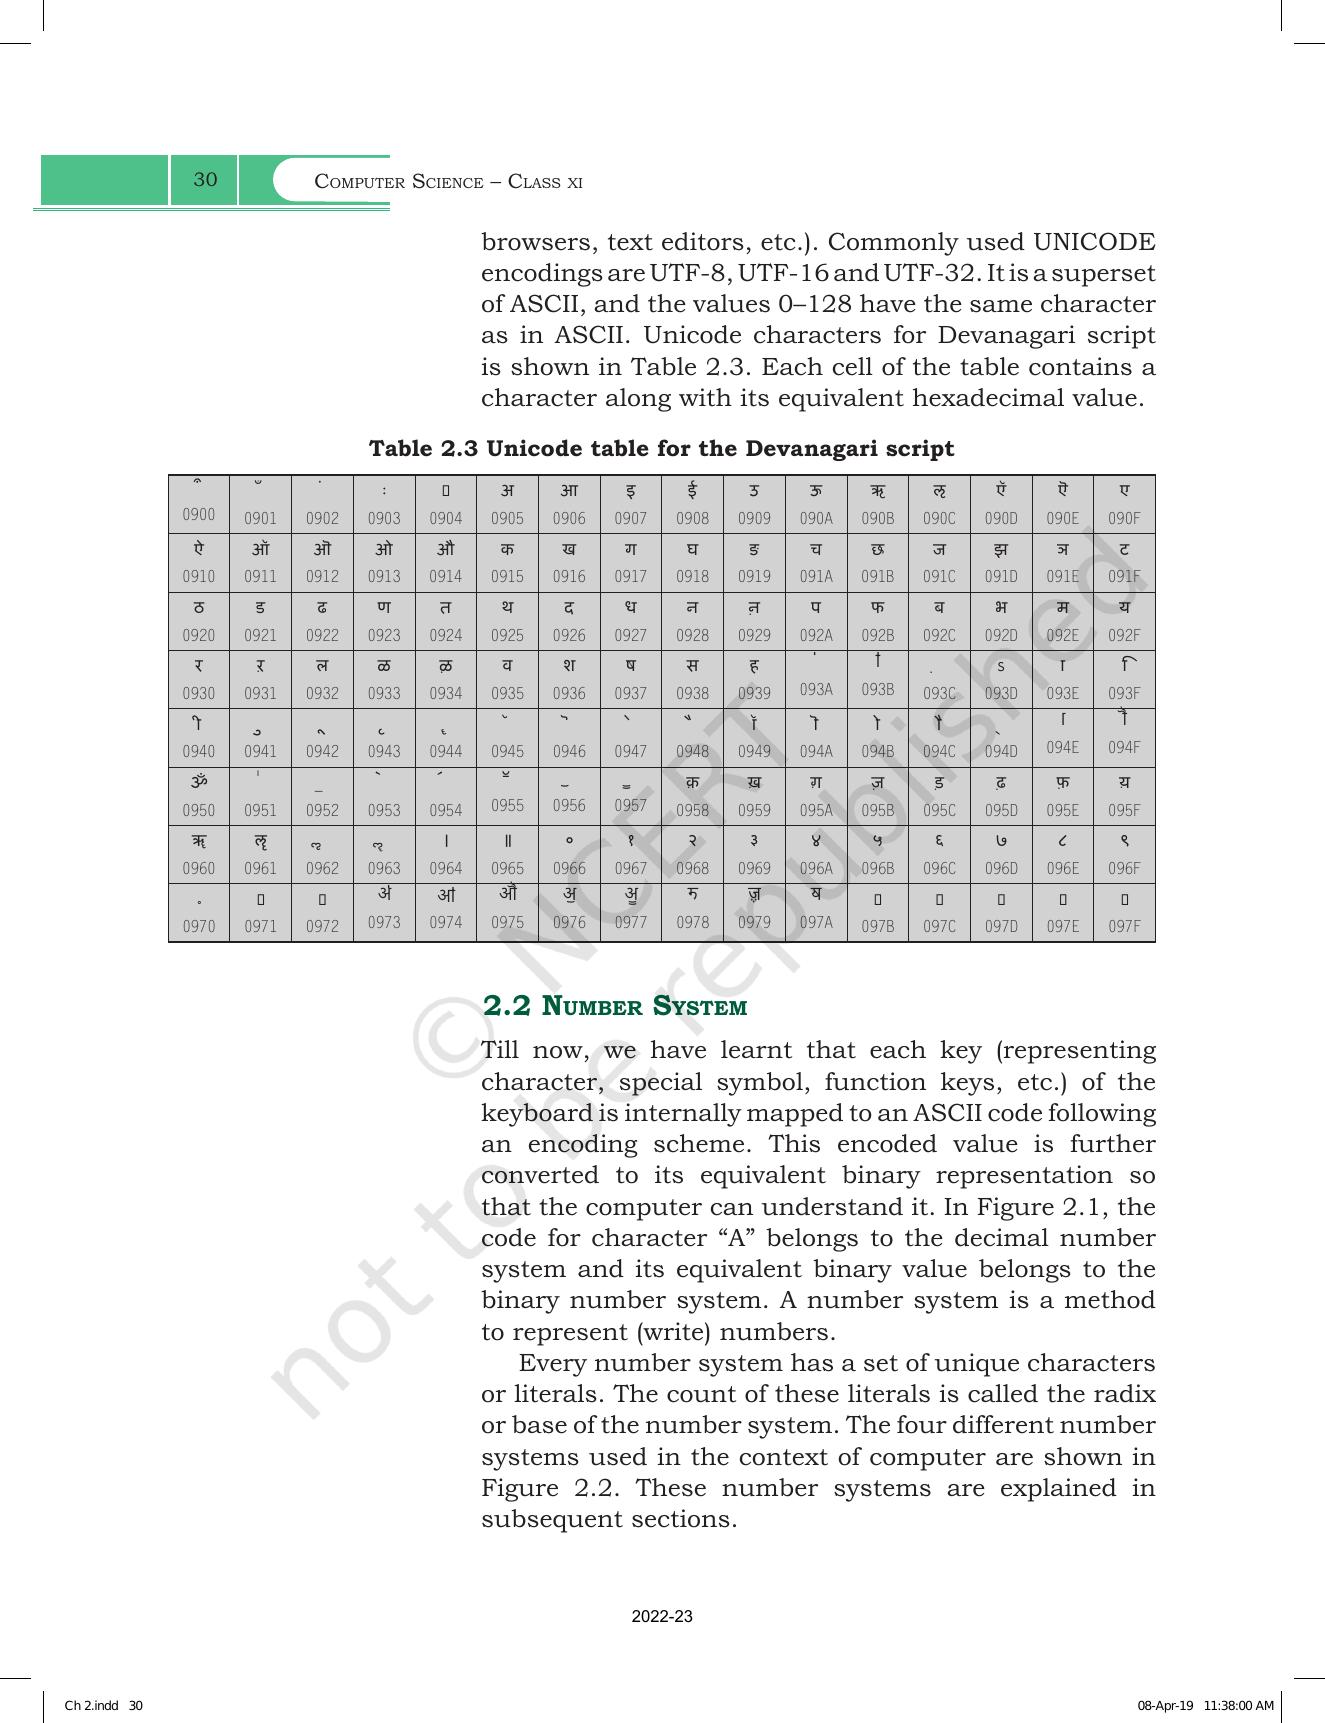 NCERT Book for Class 11 Computer Science Chapter 2 Encoding Schemes and Number System - Page 4